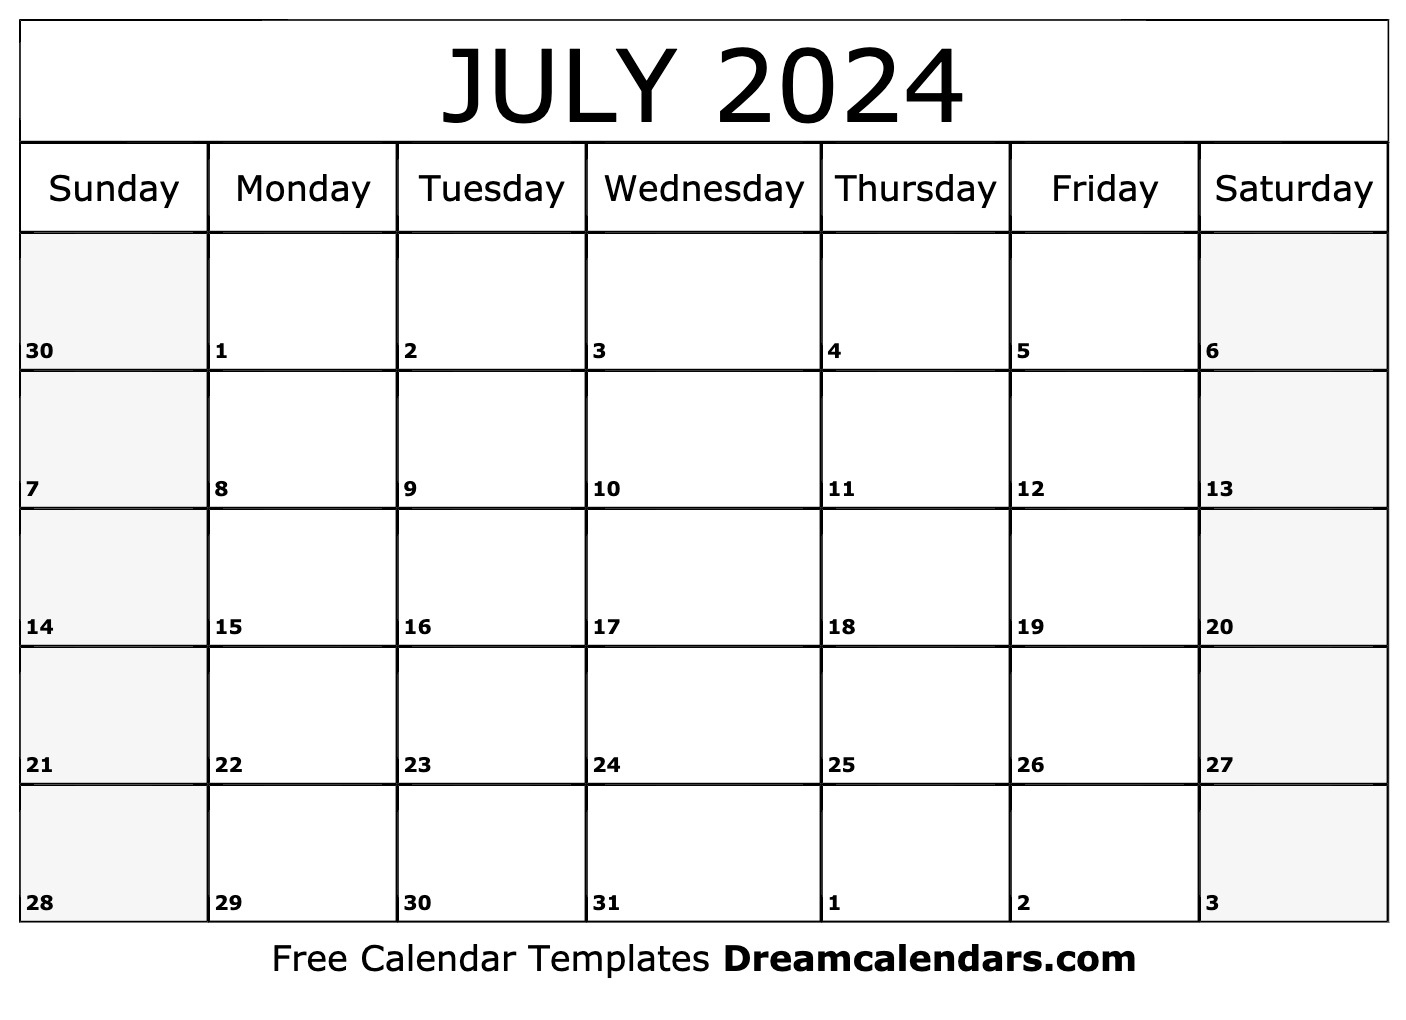 July 2024 Calendar - Free Printable With Holidays And Observances | 21 July 2024 Calendar Printable